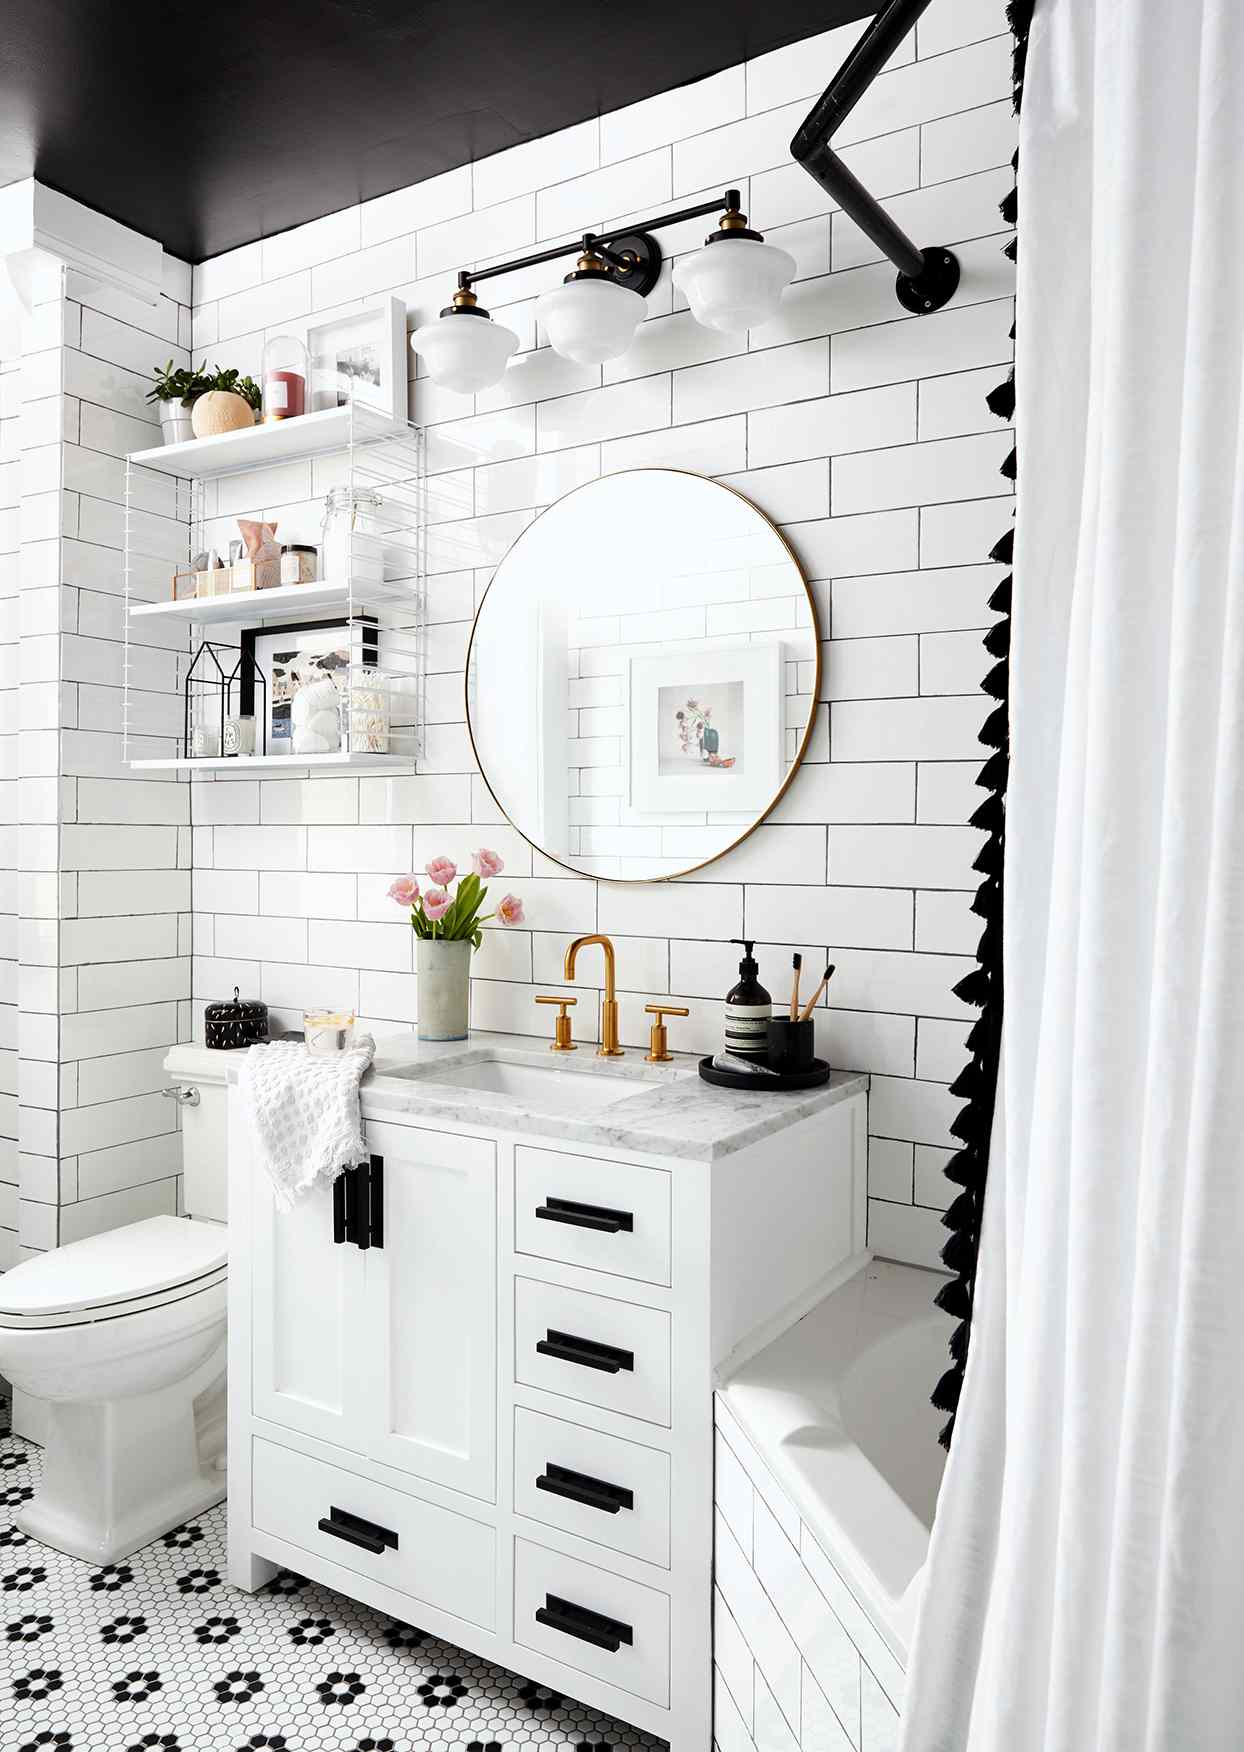 19 Small Bathroom Vanity Ideas That, How To Install A Bathroom Vanity Unit And Sink